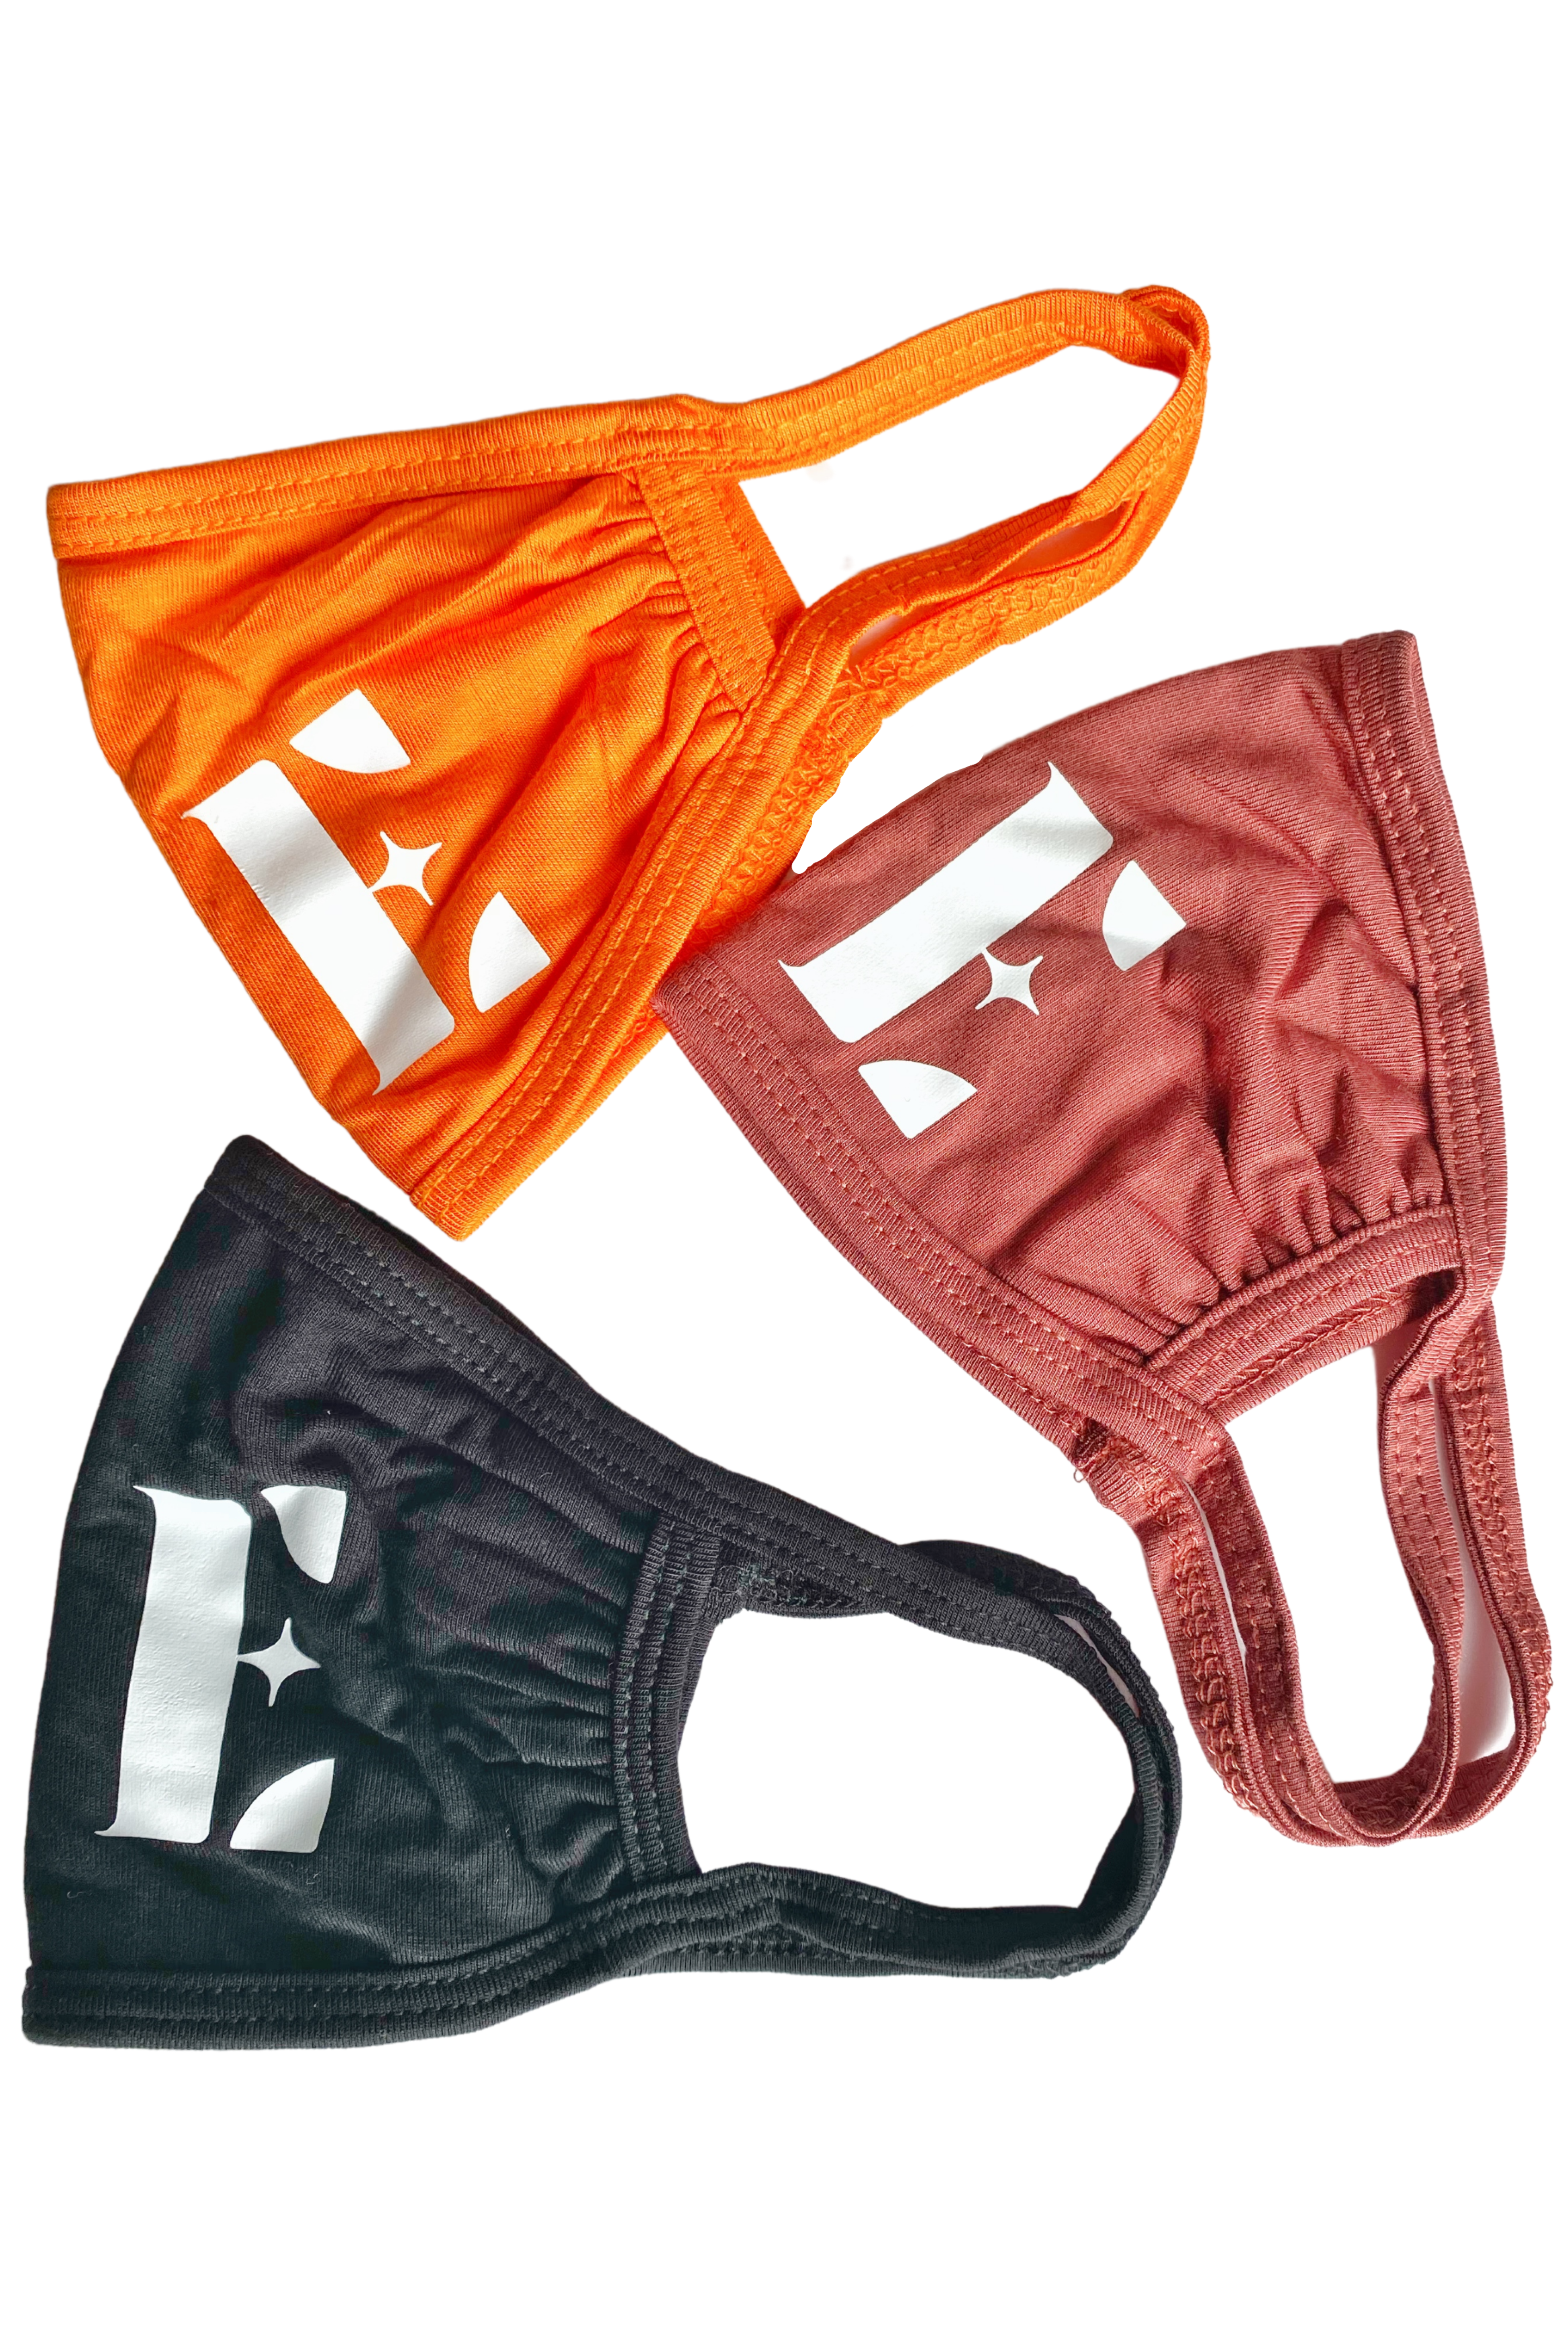 Orange, mauve pink, and black reusable face mask. The face masks have the E's Element imprinted in white. Spice Face Mask by E's Element.